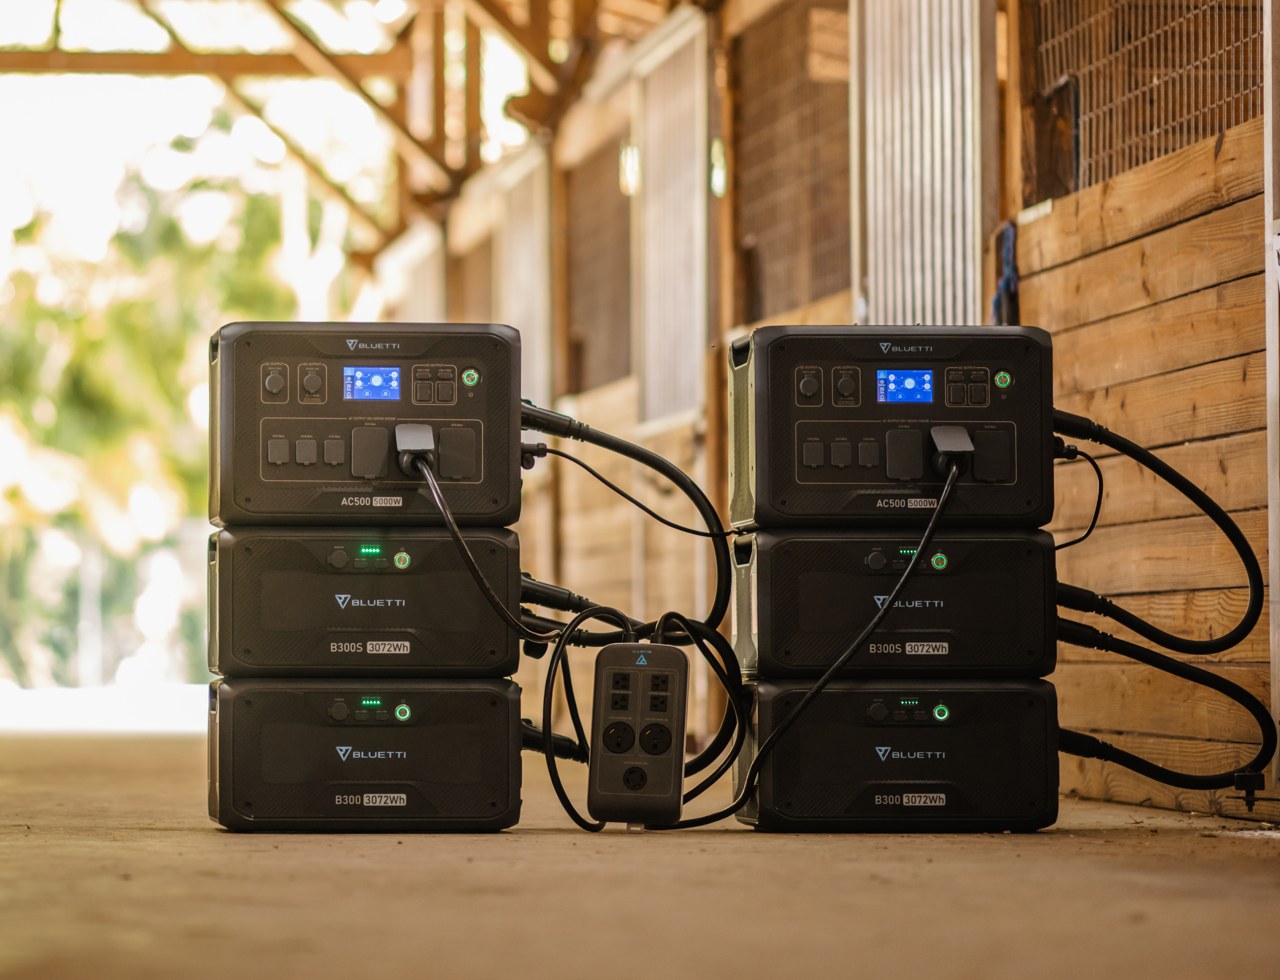 Portable power station with a staggering 5000W output can power